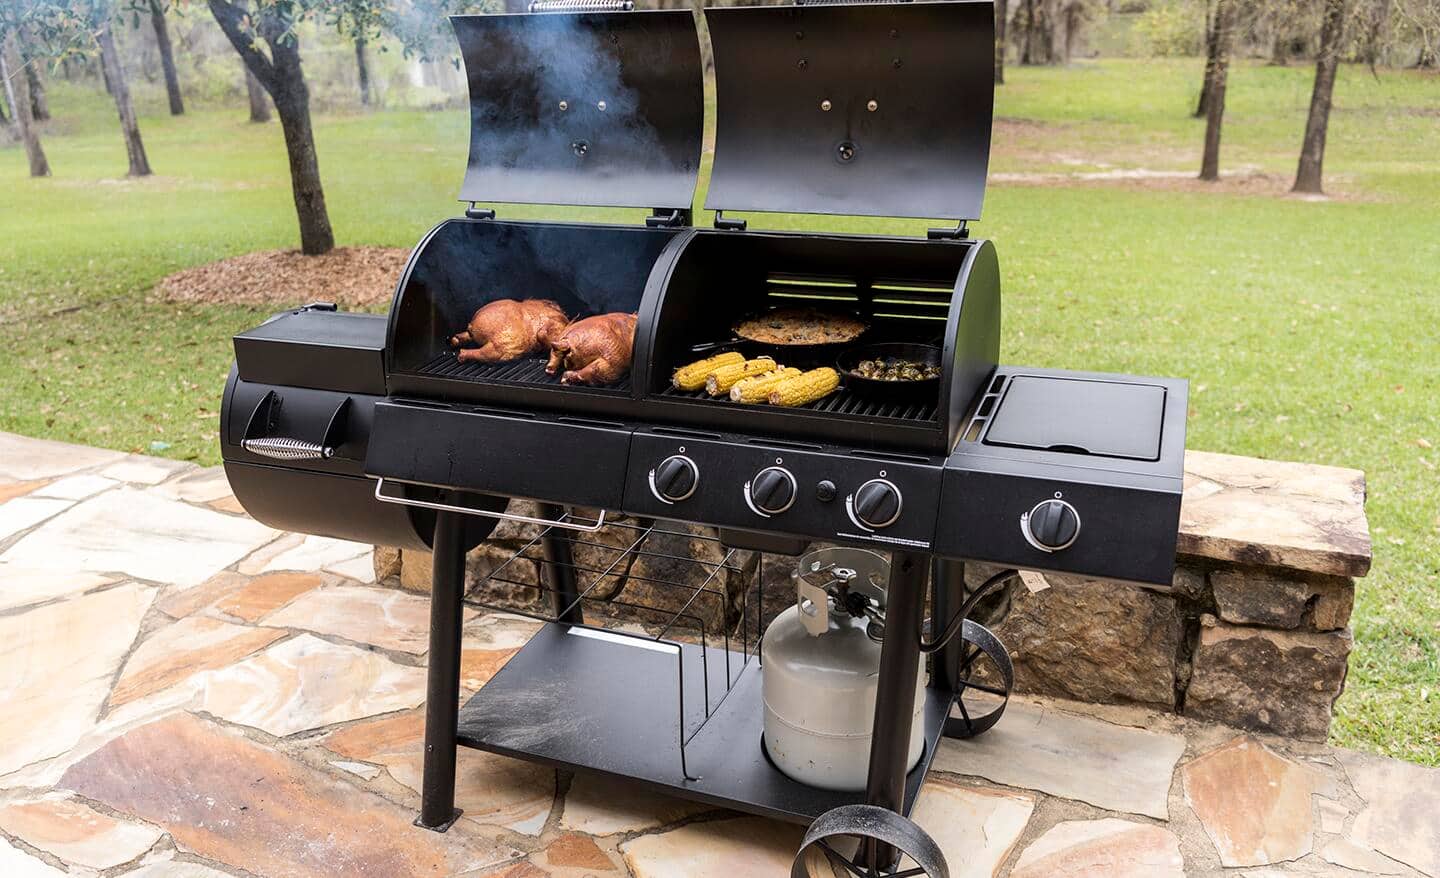 Meat, corn on the cob and other food cooks in a combination grill-smoker on a stone patio.